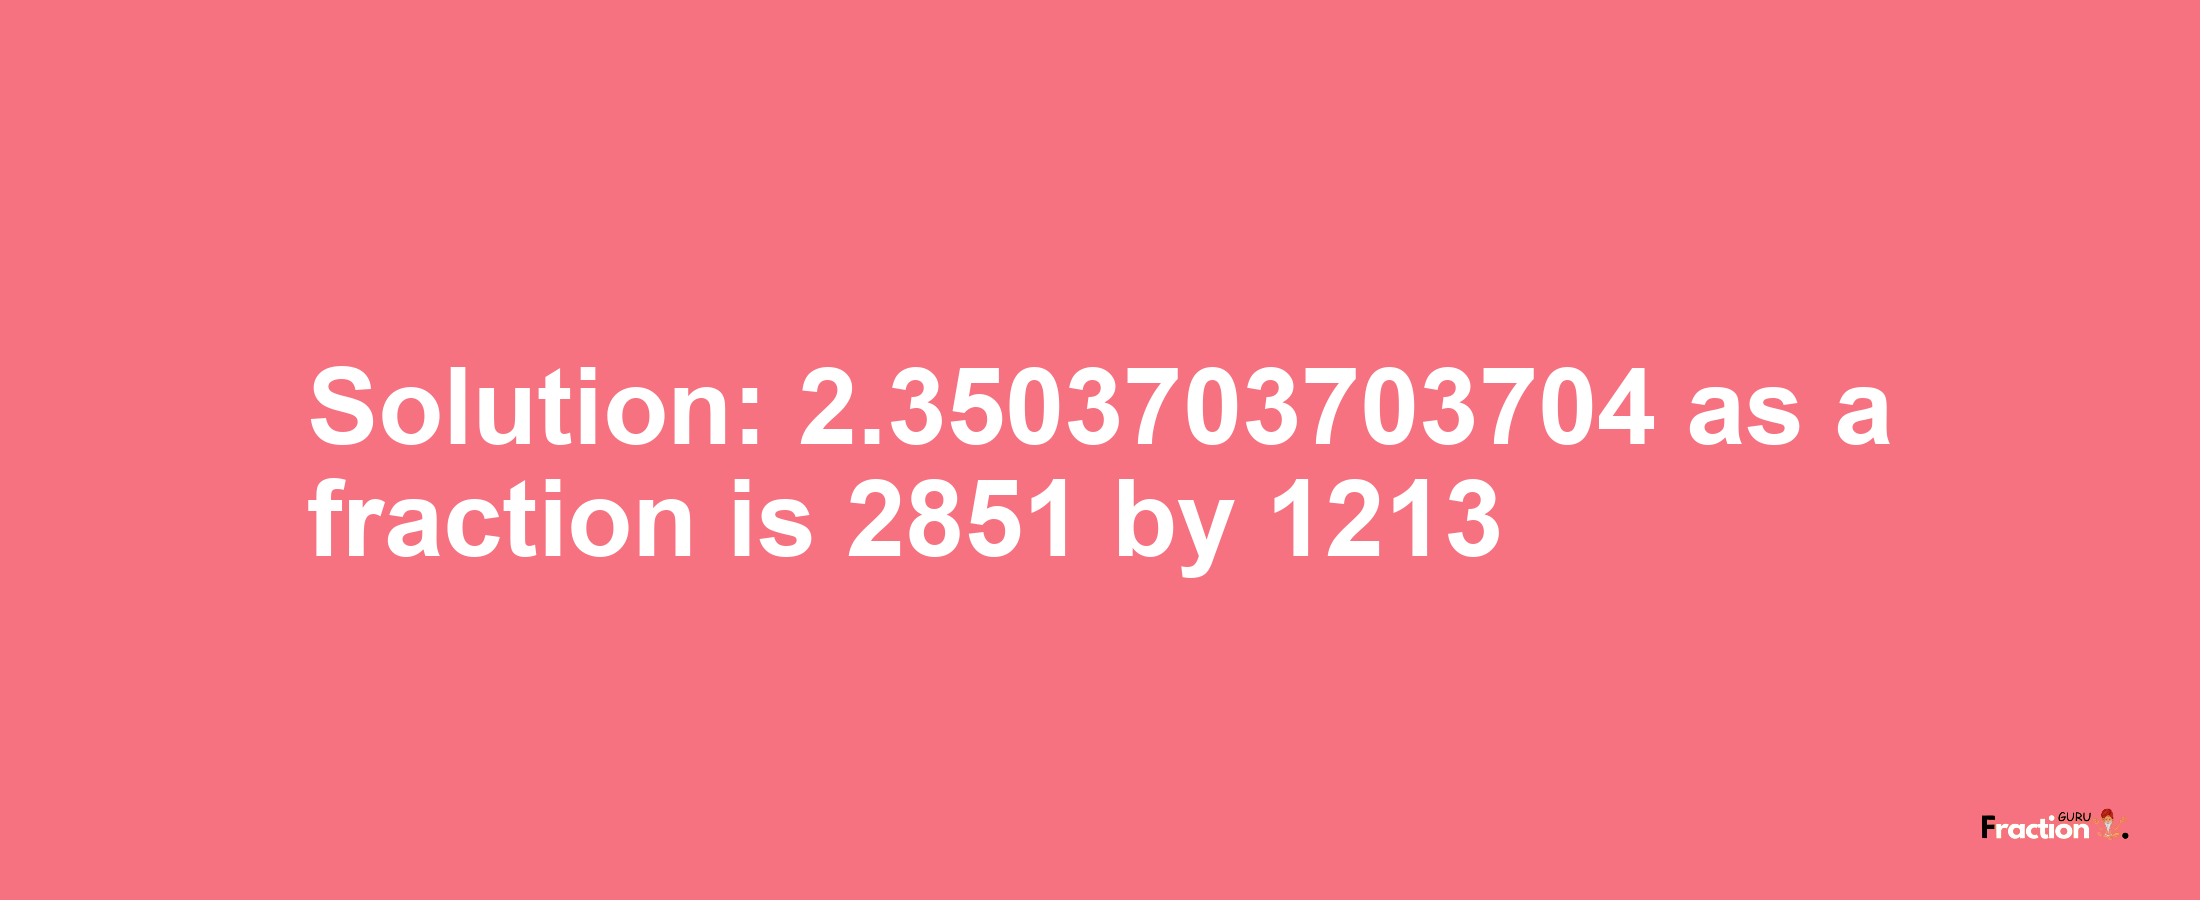 Solution:2.3503703703704 as a fraction is 2851/1213